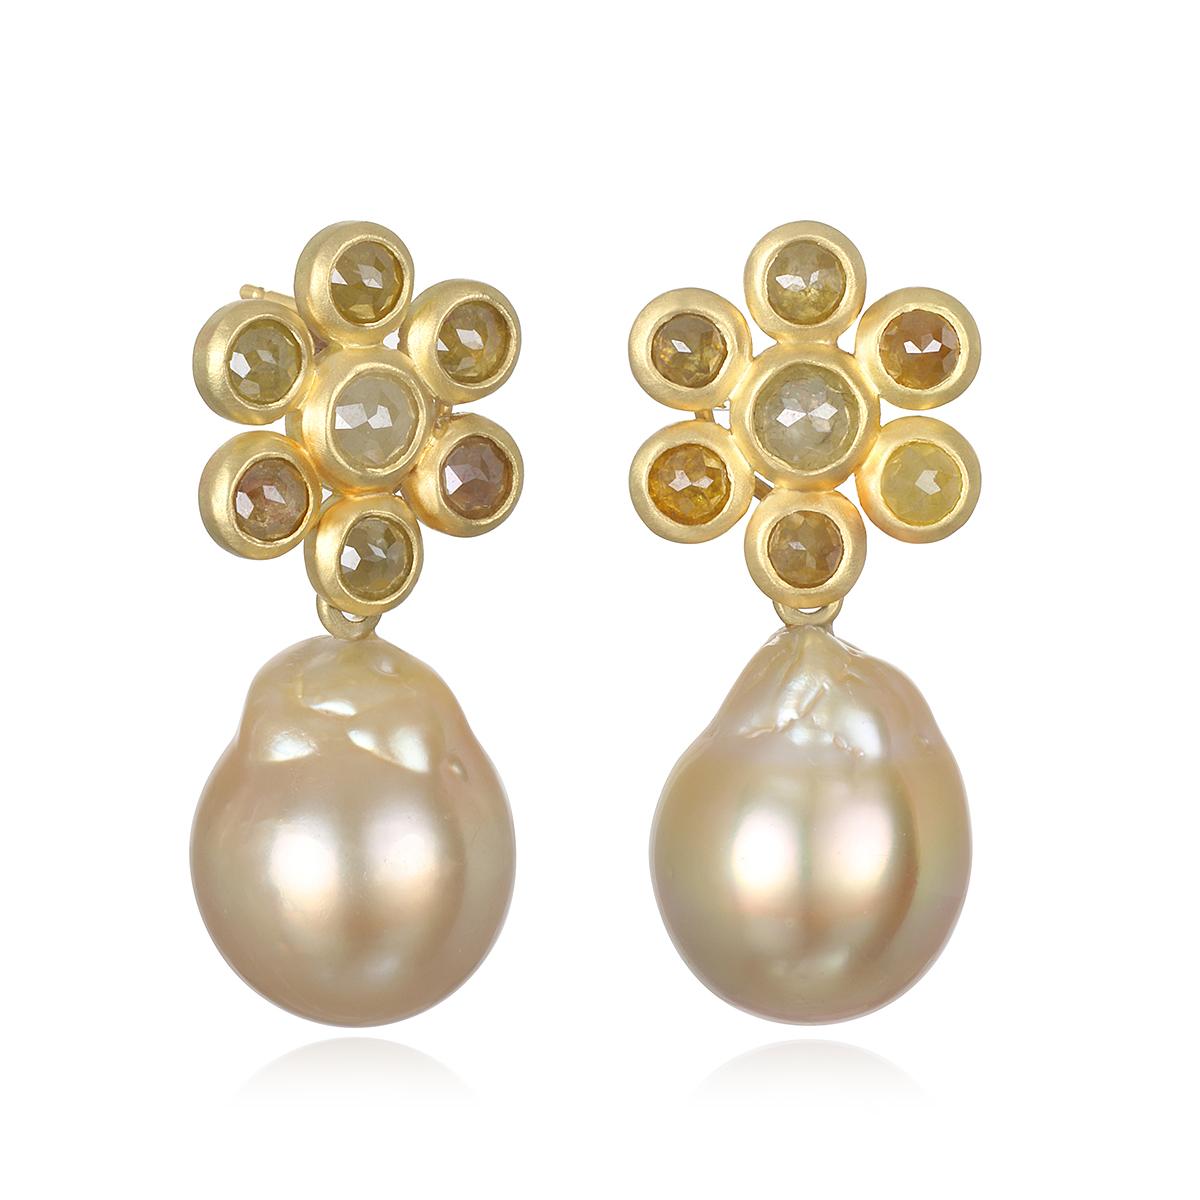 Faye Kim's signature 18 Karat Gold Raw Diamond Daisy and White South Sea Pearl Drops comprise two earrings in one. The White South Sea Pearl Drops are detachable, allowing the daisy diamond earrings to be worn on their worn as diamond studs. 